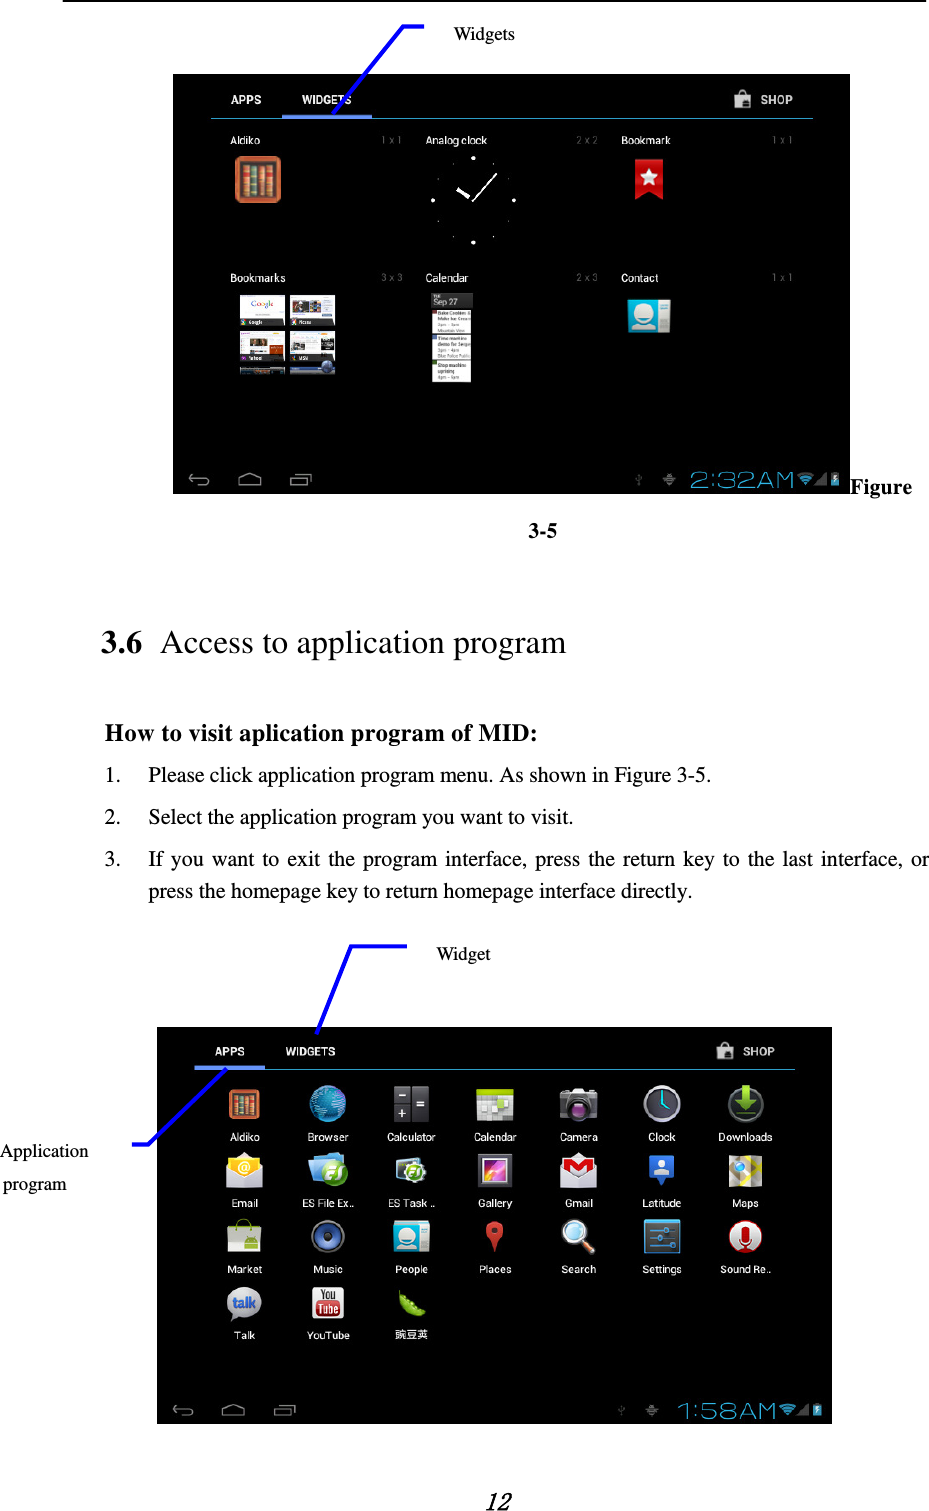    12  Figure 3-5 3.6 Access to application program How to visit aplication program of MID: 1. Please click application program menu. As shown in Figure 3-5. 2. Select the application program you want to visit. 3. If you want to exit the program interface, press the return key to the last interface, or press the homepage key to return homepage interface directly.     Application program Widget Widgets 